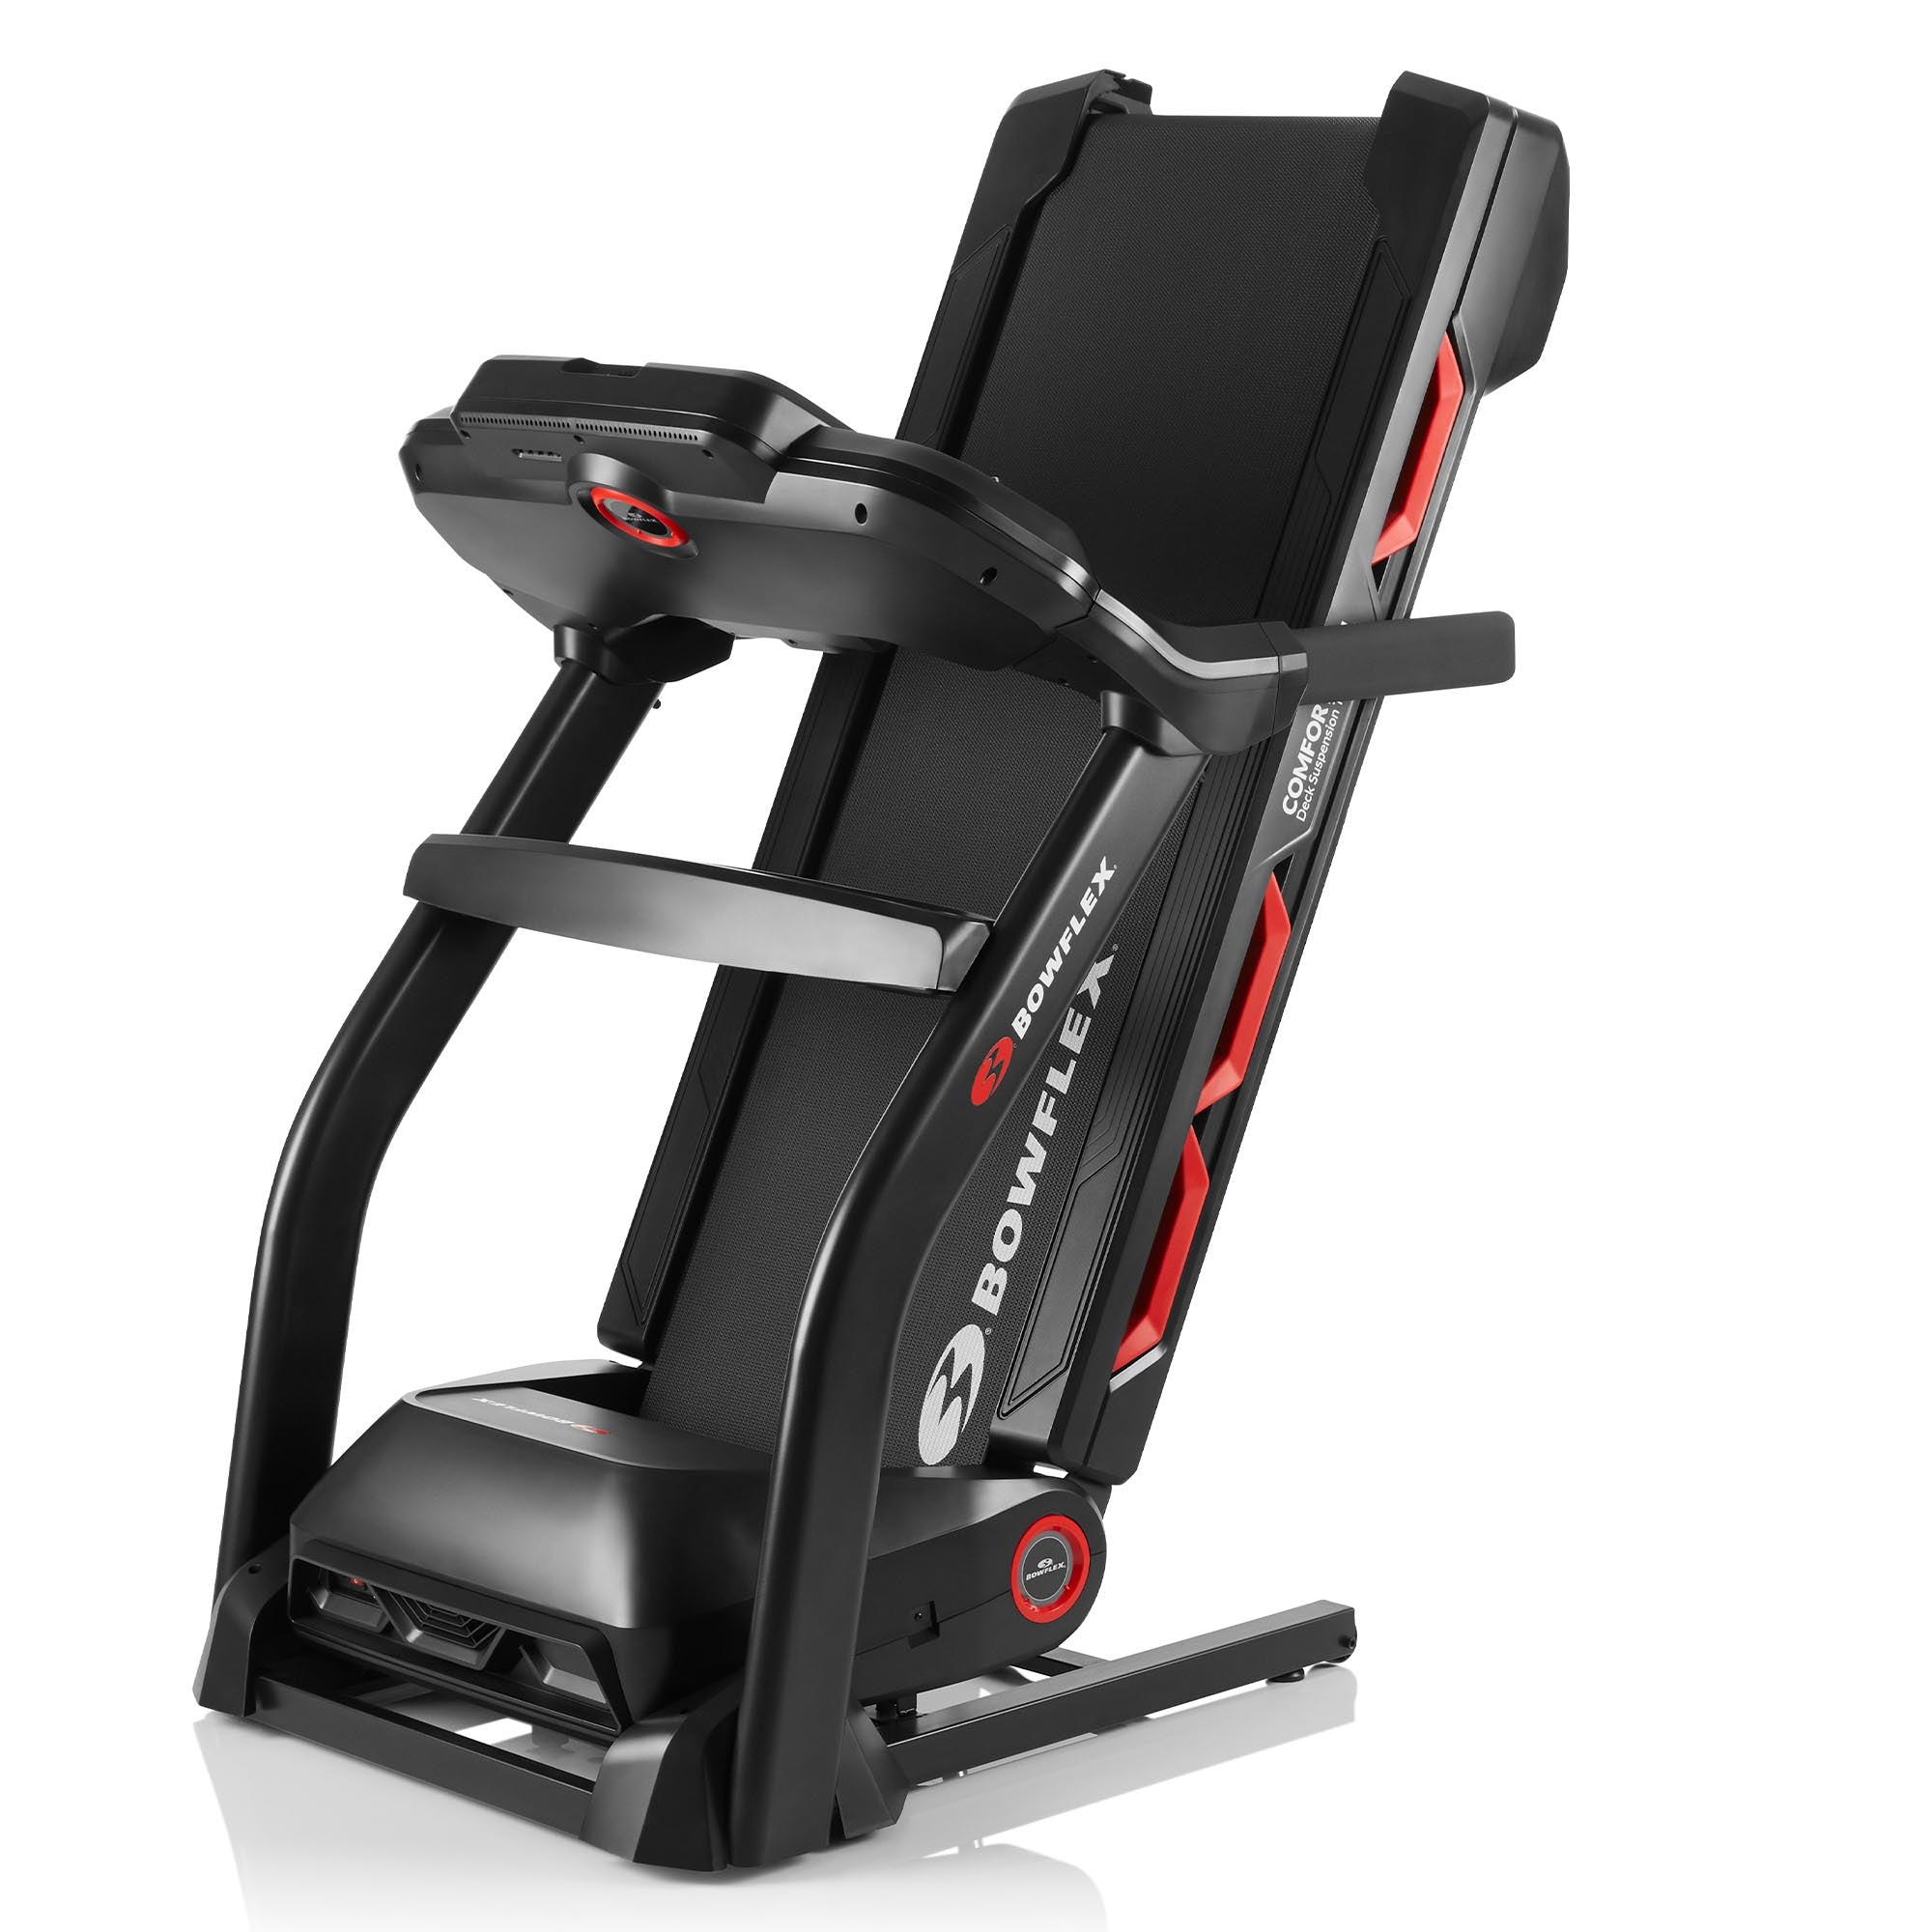 Maximize Your Run with Bowflex Treadmill A Comprehensive Review